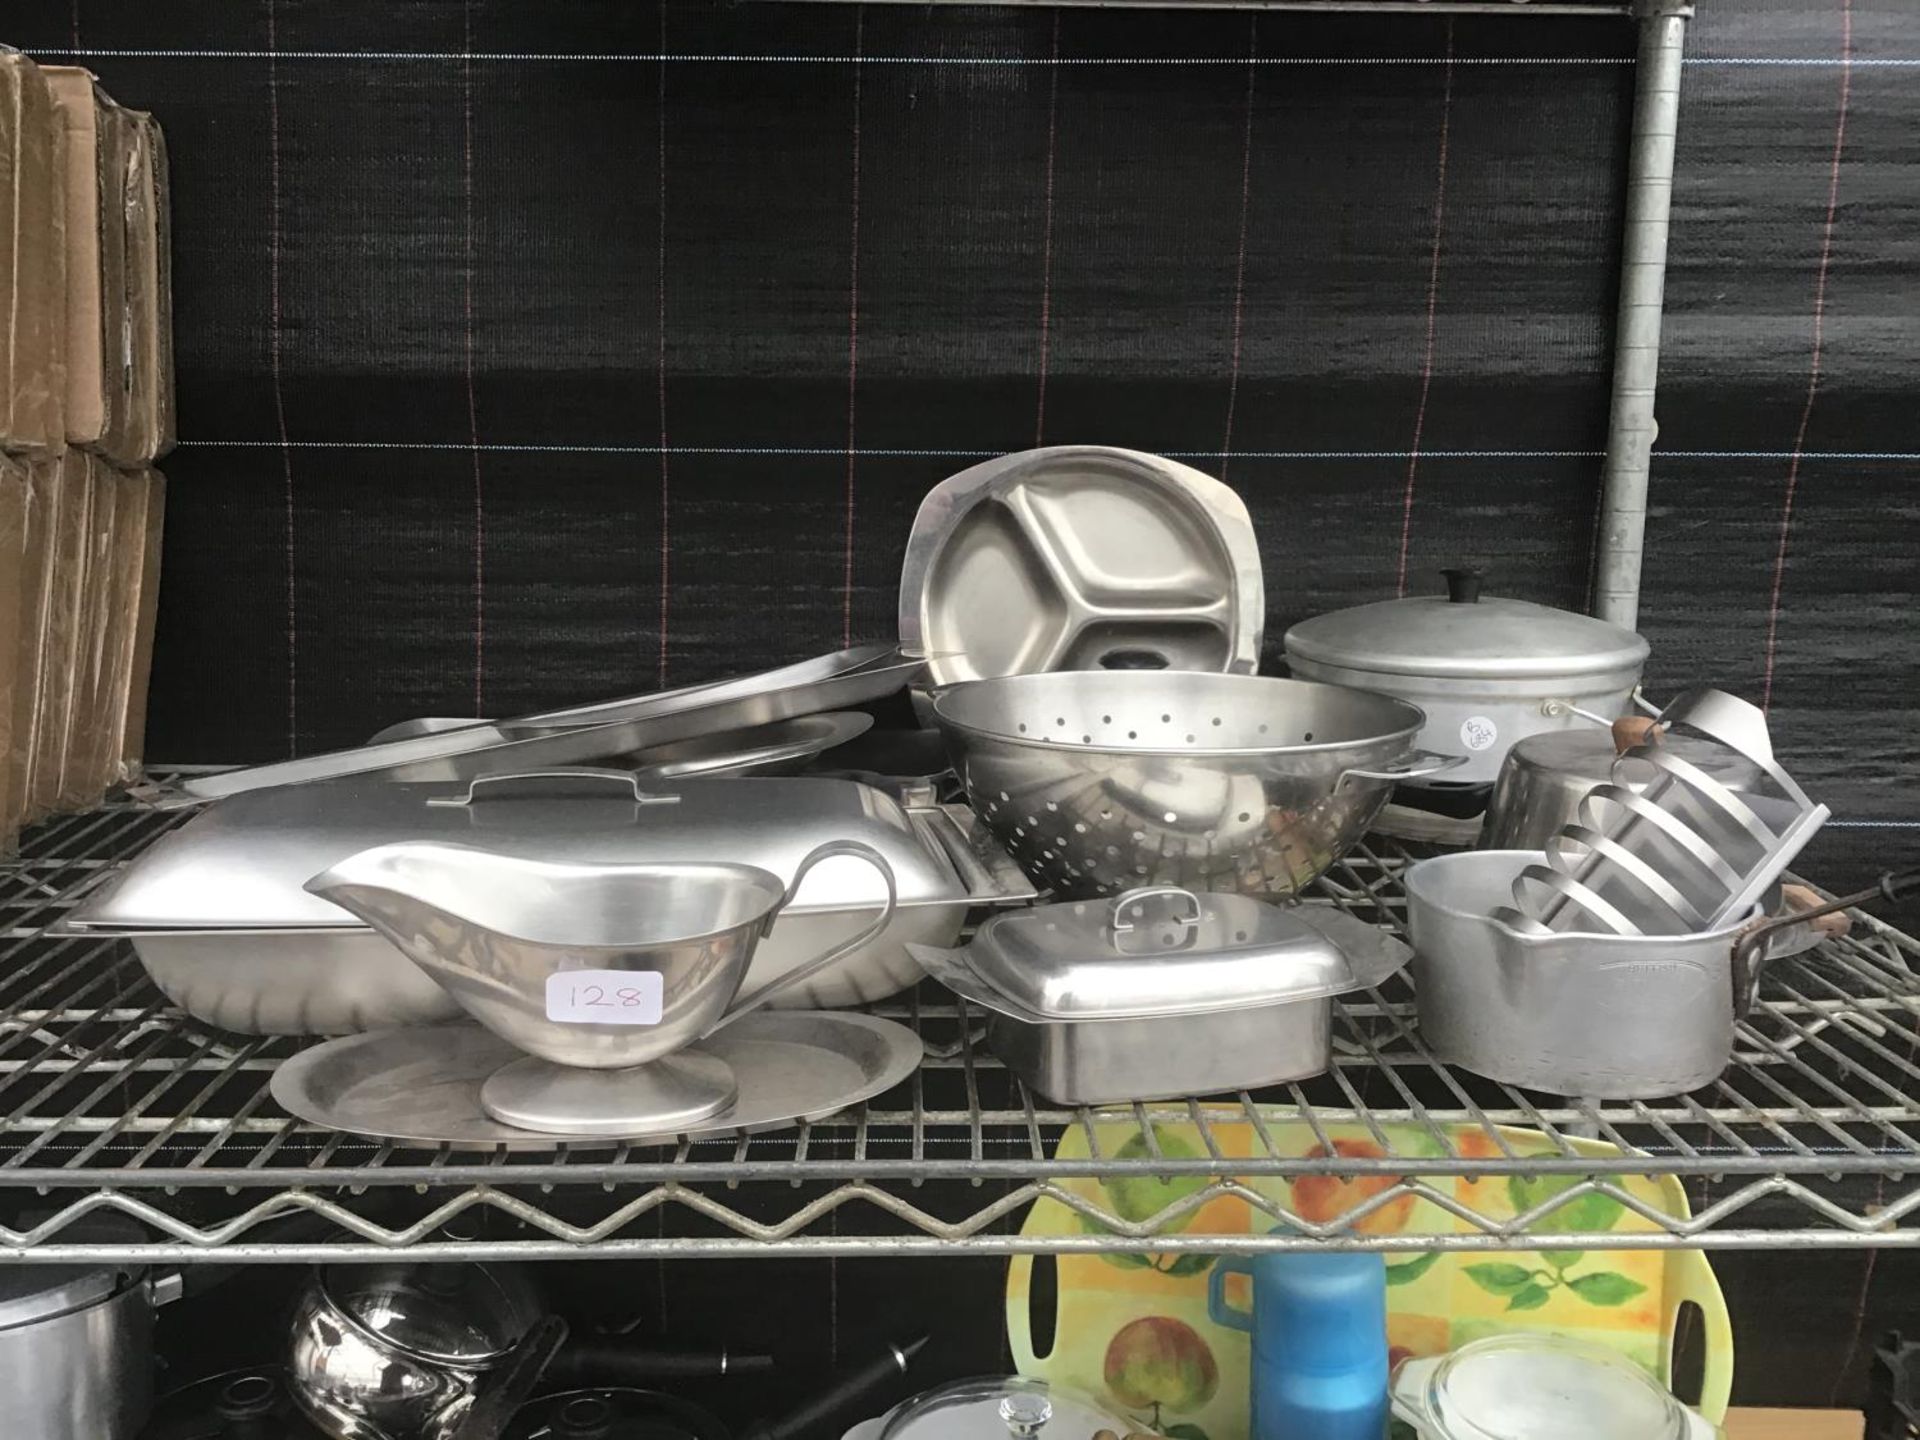 VARIOUS ITEMS OF STAINLESS STEEL KITCHEN WARE